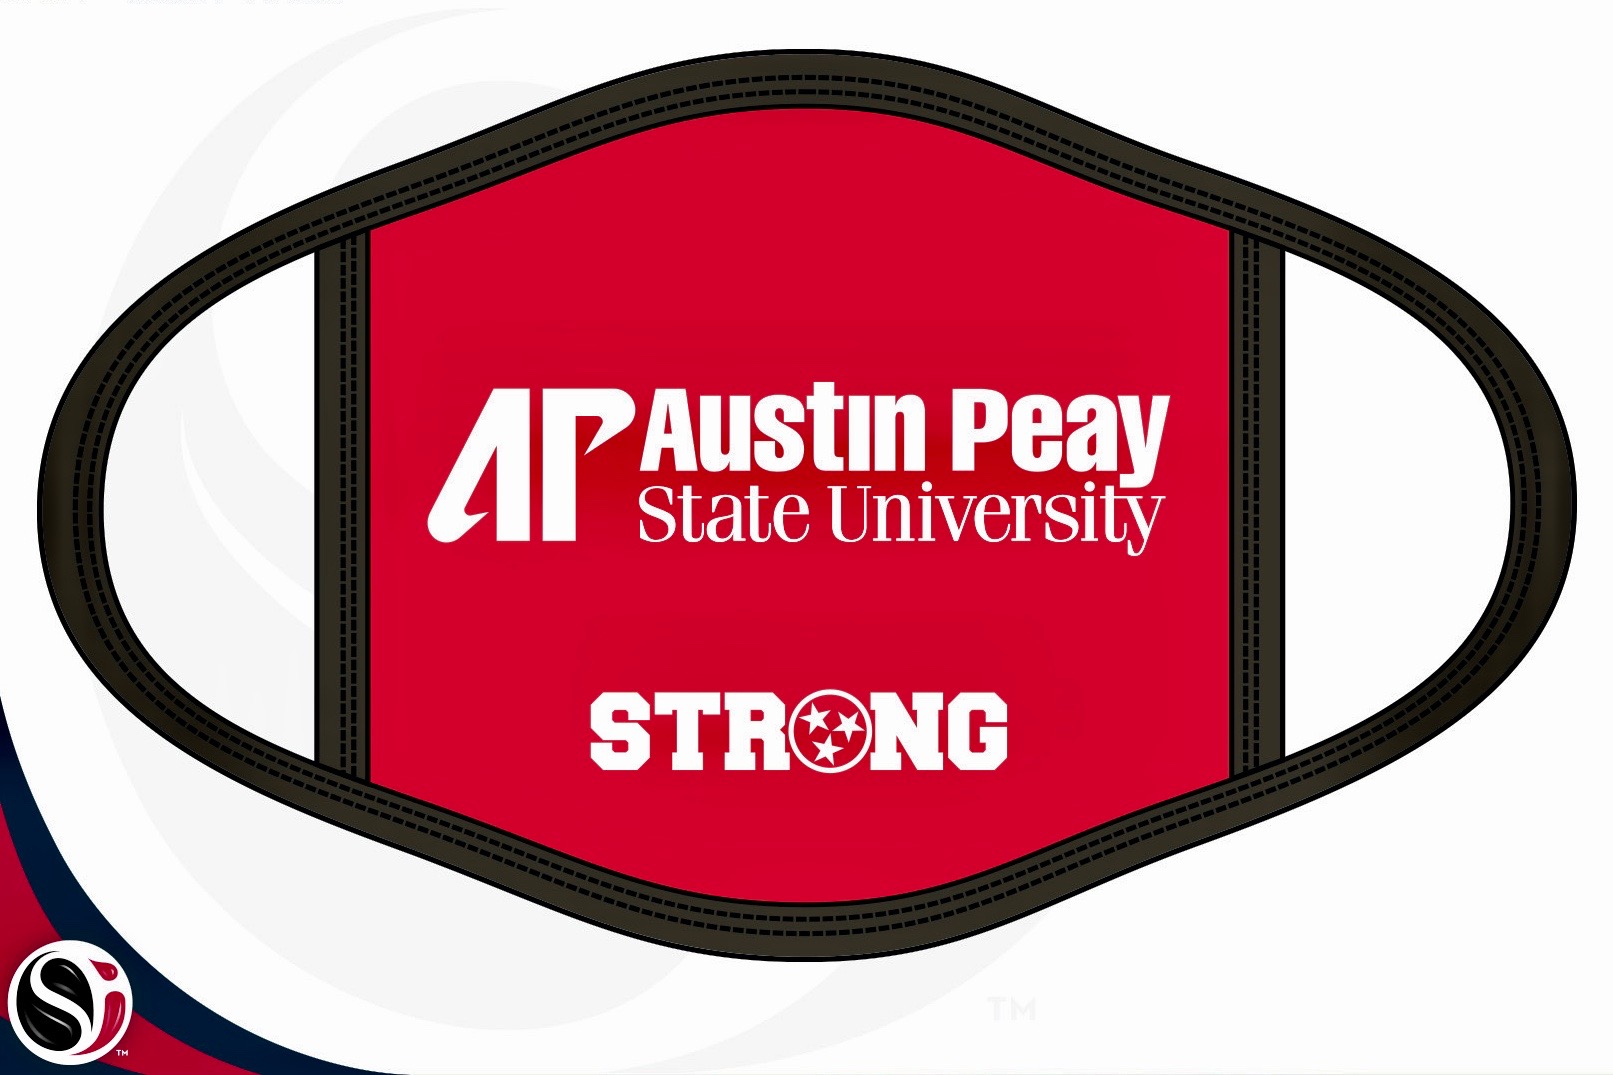 Austin Peay State University has joined a state effort to distribute close to 300,000 free or low-cost cloth face coverings across the state.  The University bought 30,000 (about 10 percent of the masks) to give to students, staff and faculty. Austin Peay officials also expect to give the masks to alumni and university supporters.  The masks will be free.  “Our goal is to ensure our faculty, staff and students get masks, but we also understand we have alumni, donors and supporters who want masks as well,” said Michael Kasitz, assistant vice president for public safety at APSU.  Austin Peay officials will release details soon on how to get the masks.  More about the state’s effort  APSU joined Tennessee Gov. Bill Lee’s Economic Recovery Group’s (ERG) TN Strong Mask Movement, partnering with more than 30 flagship brands to distribute close to distribute the masks. Residents can stay safe while wearing brands synonymous with Tennessee from the worlds of sports, education, and business.  “Tennesseans have stepped up to do their part and keep their neighbors safe throughout this health crisis,” said Mark Ezell, director of the Economic Recovery Group. “The more we can encourage masks and make them fun, the better we can mitigate the spread of the COVID-19. These businesses are the heart and soul of Tennessee, and we’re grateful to them for helping our citizens stay healthy and have a little fun sporting their favorite brands while they’re at it.”  The CDC recently released new guidance for public events and gatherings, strongly encouraging wearing masks to lower the risk of exposure and reduce the spread of COVID-19. As Tennessee safely continues to reopen the economy and residents and travelers alike move about the state, masks have become an important health accessory.  “We are so appreciative of Governor Lee and Commissioner Ezell to include the Nashville Predators in promoting the use of masks so SMASHVILLE can continue to open in the safest possible manner,” Nashville Predators President/CEO Sean Henry said. “By creating SMASHVILLE Strong and Predator-themed masks, we can all show our passion for the Preds while reinforcing the use of face coverings as we work to re-launch the economy and local businesses.”  Each business will distribute branded cloth face coverings at little to no cost across their own channels or with the help of the State of Tennessee, which could include employees, fans or nonprofit partnerships. Companies can visit https://tn.gov/governor/covid-19/economic-recovery/mask-movement for additional information. The general public can also visit the link above to order a TN Strong branded mask.  Participating brands include:  • Amazon • Austin Peay State University • Belmont University (courtesy Dickens Family) • BlueCross BlueShield of Tennessee Foundation • Bridgestone • Bristol Motor Speedway • Chevrolet • East Tennessee State University • FedEx Express • Gatlinburg, Pigeon Forge and Sevierville of Sevier County • Gibson Brands • Graceland • Jack Daniel’s • Lipscomb University (courtesy Ezell Foundation) • Memphis Grizzlies • Middle Tennessee State University • Nashville Predators • Nashville SC (courtesy Ingram Charities, distributed in partnership with United Way of Greater Nashville) • Ryman Hospitality Properties, Inc. • SomethingInked • Tennessee Bankers Association • Tennessee Farm Bureau Health Plans • Tennessee Tech University • Tennessee Titans • Tractor Supply Company • TriStar Health • Union University • University of Memphis • University of Tennessee, Knoxville (courtesy The Boyd Foundation) • Unum Group • Vanderbilt University • Volkswagen Chattanooga  Tennessee began a phased reopening under the Tennessee Pledge, a plan to help Tennesseans get back to work safely and reboot the economy. Restaurants resumed business with limited capacity on April 27, quickly followed by a number of additional industries enabling tens of thousands of Tennesseans to return to work safely.  About Tennessee’s Economic Recovery Group  Governor Bill Lee established the Economic Recovery Group, a joint effort between state departments, members of the legislature, and leaders from the private sector to build guidance to safely reboot Tennessee’s economy. The group is led by Tennessee Department of Tourist Development Commissioner Mark Ezell.